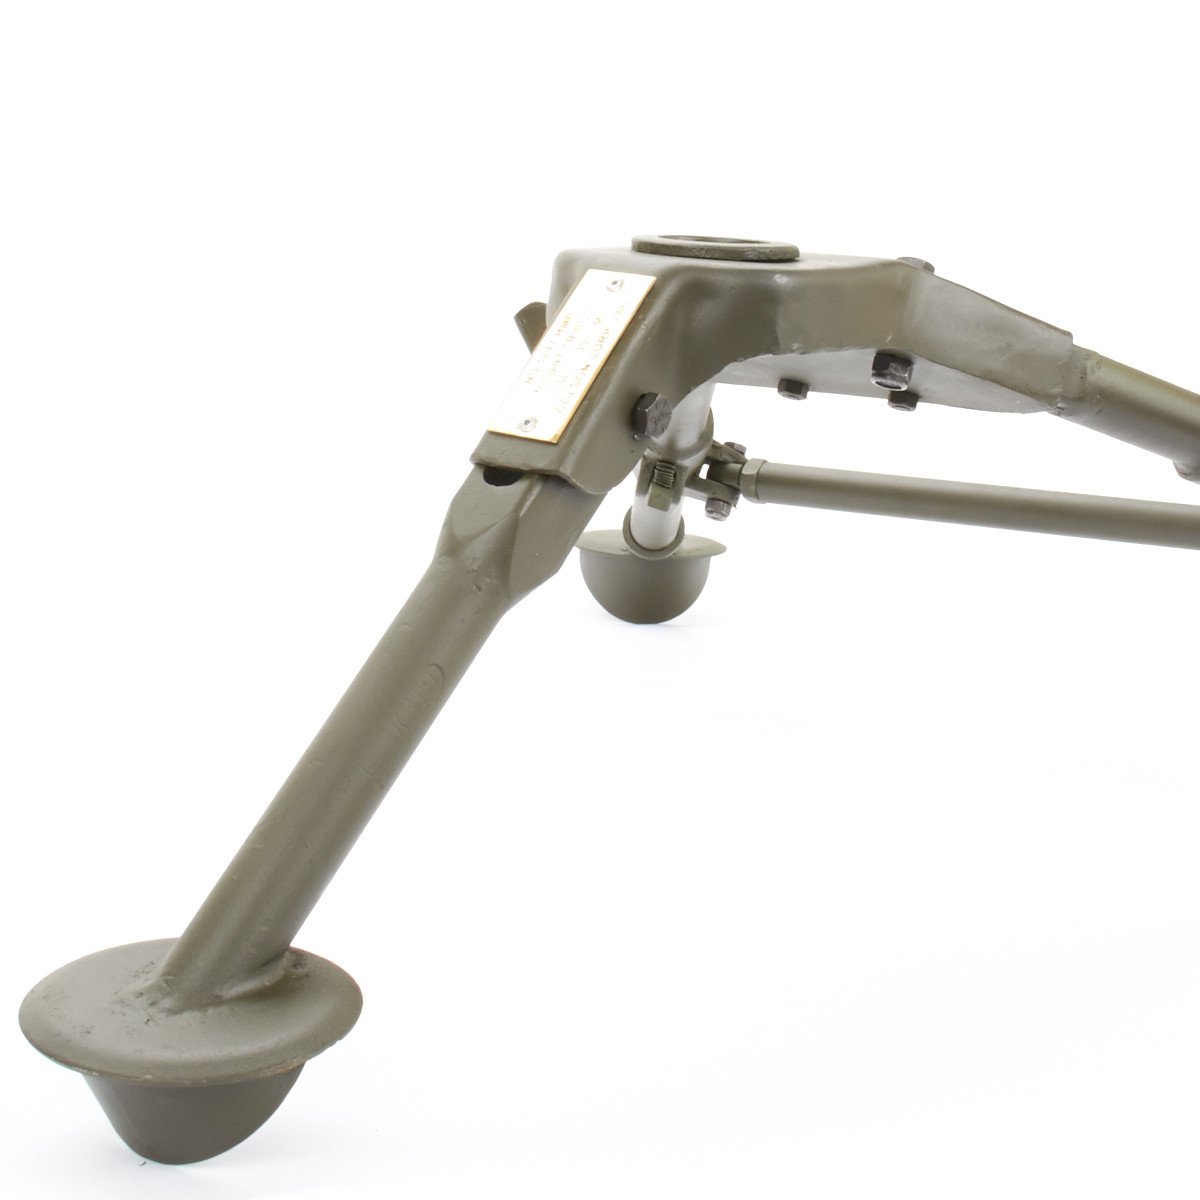 U.S. Browning M1919A4 .30 cal M2 Tripod with Pintle